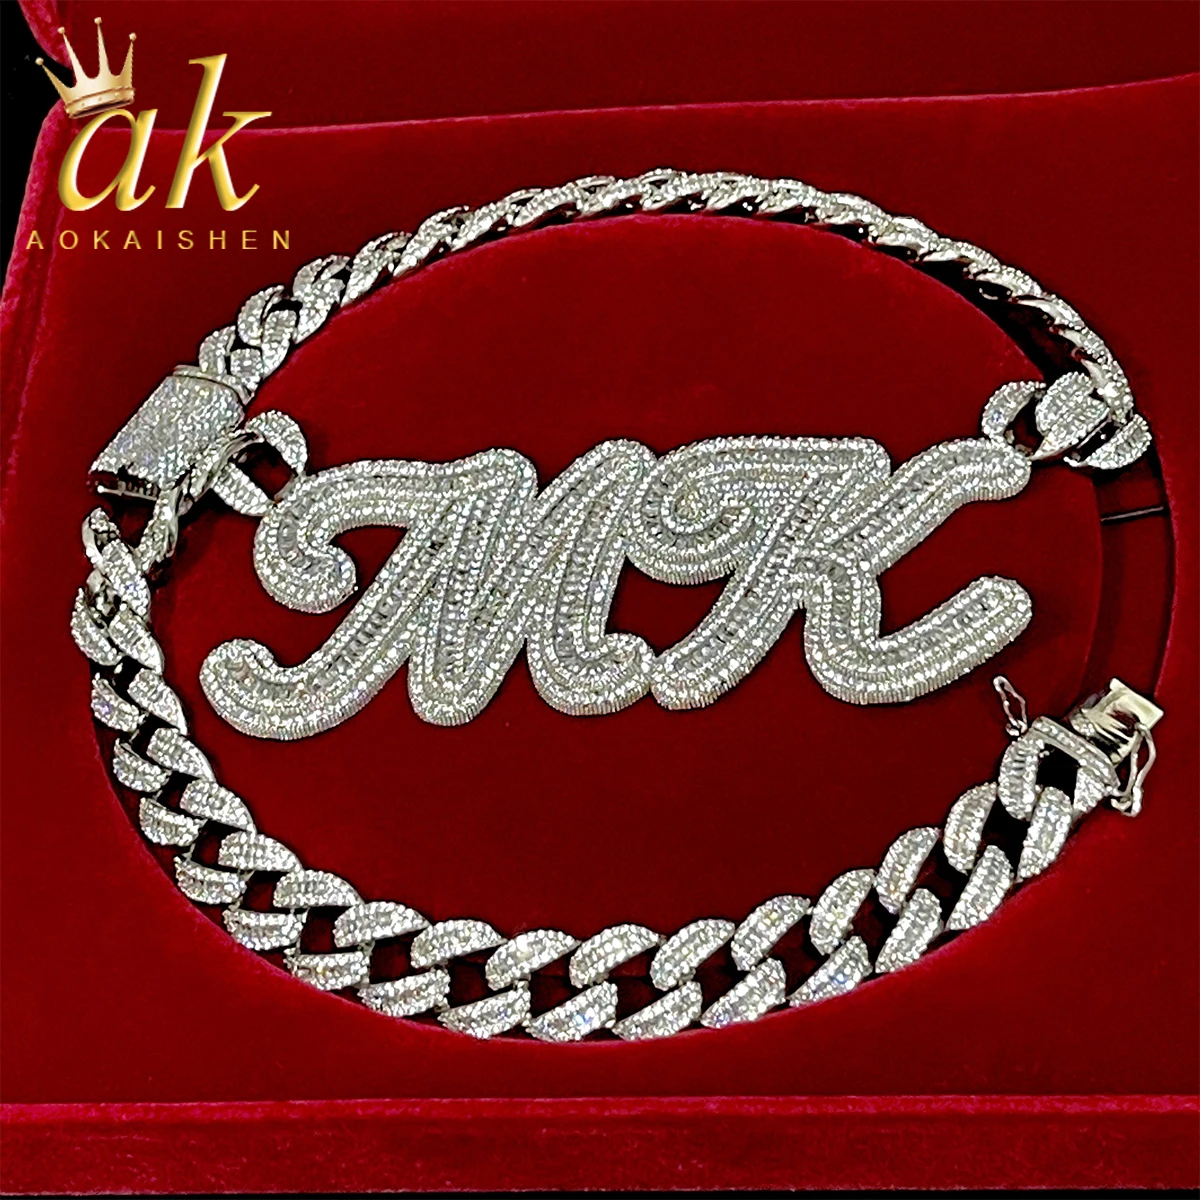 Aokaishen Custom Cursive Letter Name Pendant For Men Solid Back Bling Zirconia Hip Hop Necklace Chain Make Jewelry